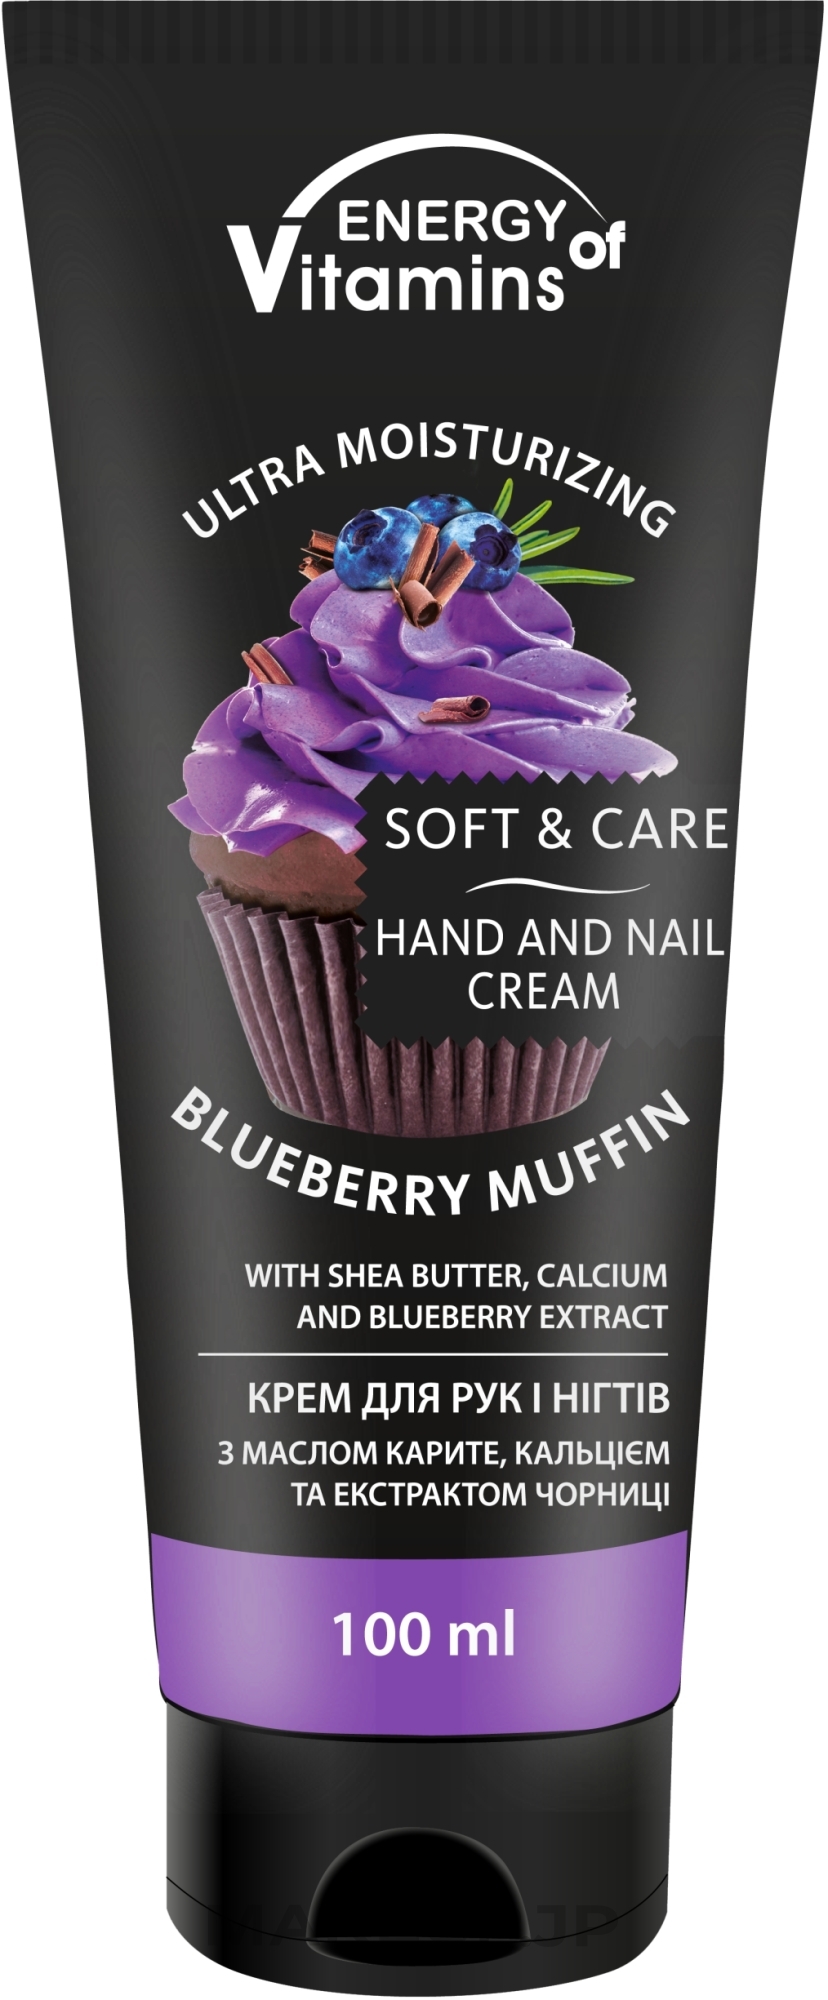 Blueberry Muffin Hand & Nail Cream - Energy of Vitamins Soft & Care Blueberry Muffin Cream For Hands And Nails — photo 100 ml